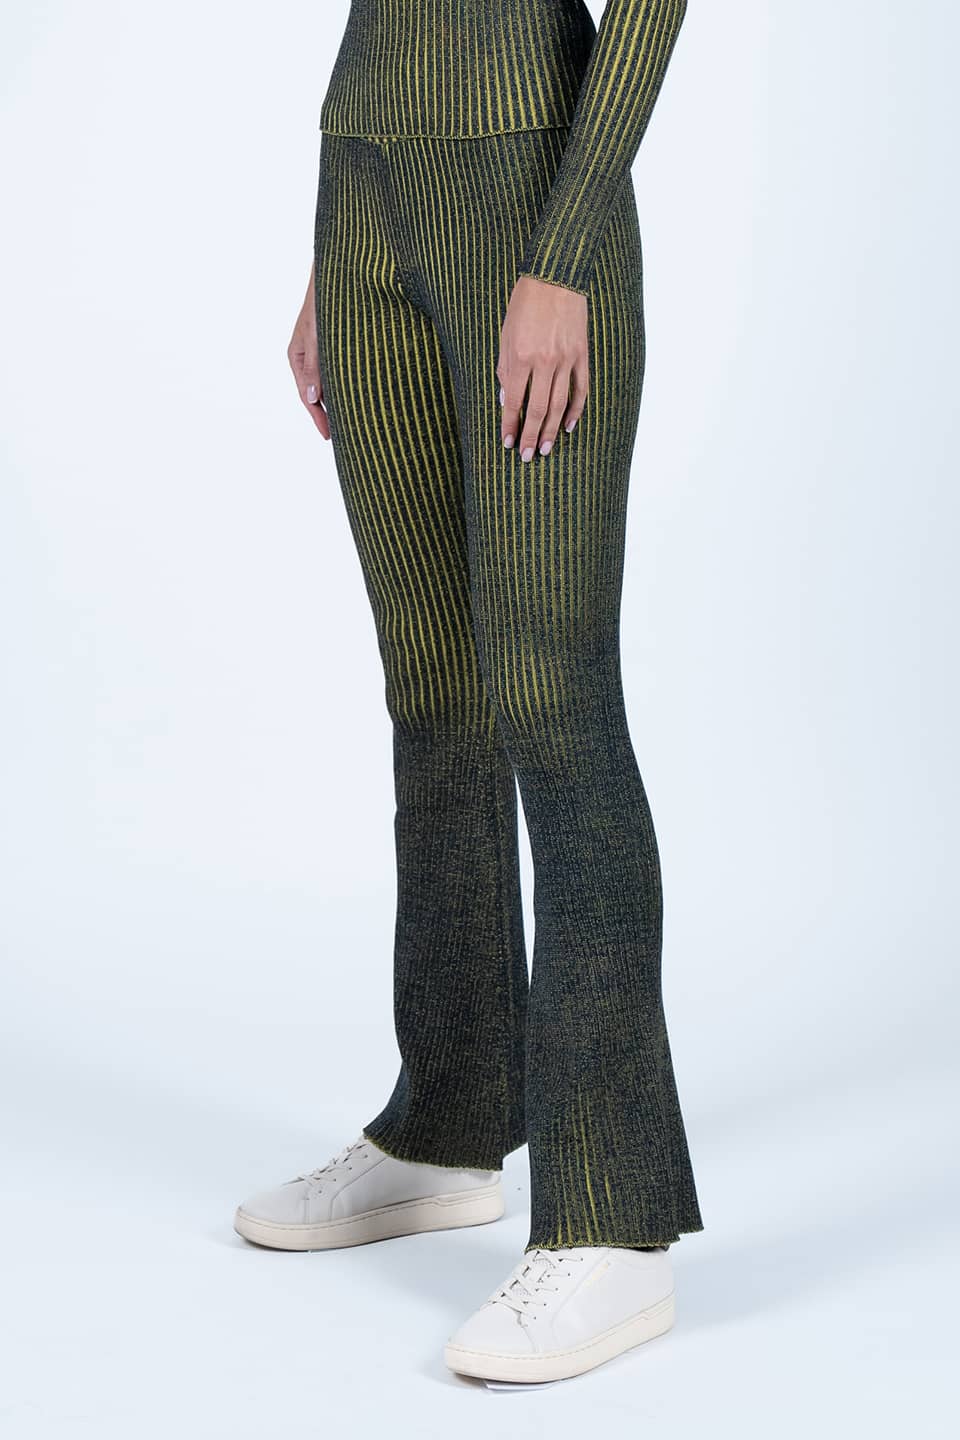 Thumbnail for Product gallery 1, Yellow Knit Trousers